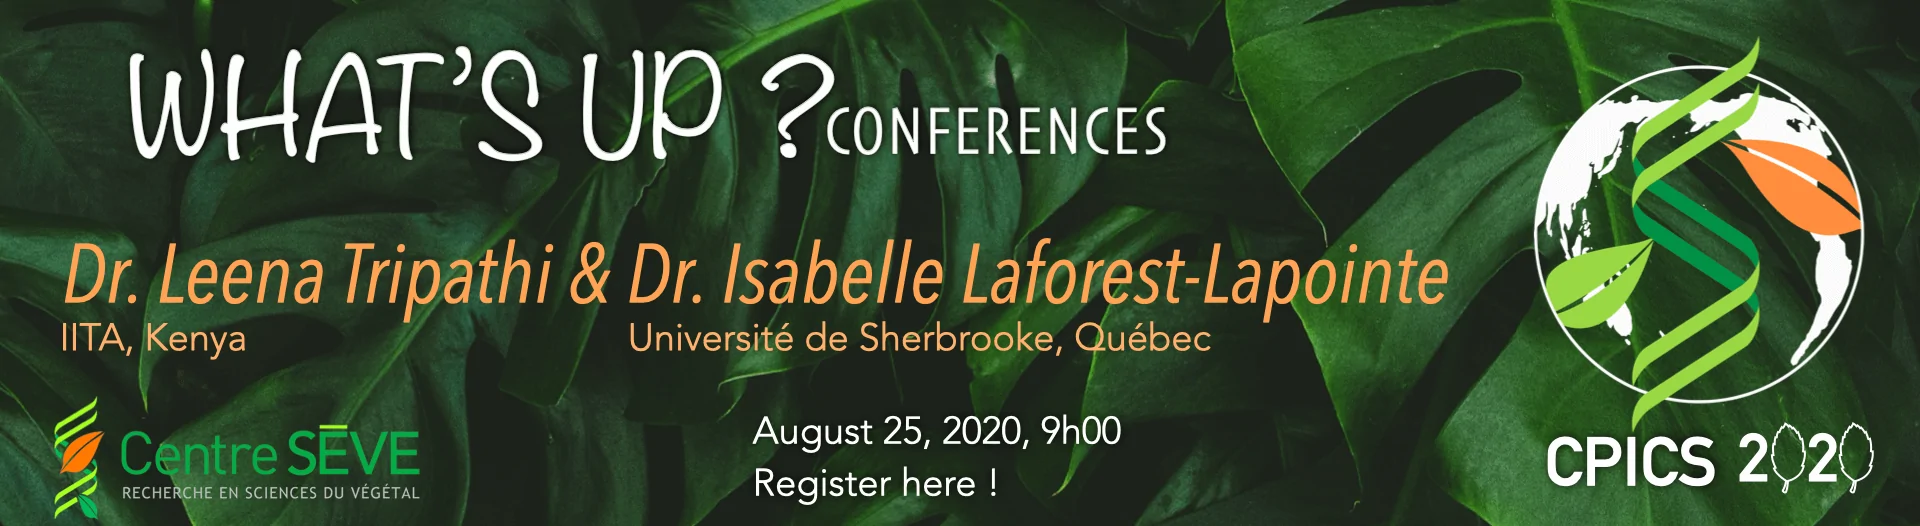 What's up conferences August 25^th^ at 9h am with Dr. Leena Tripathi from IITA Kenya and Dr. Isabelle Laforest-Lapointe from University of Sherbrooke Canada